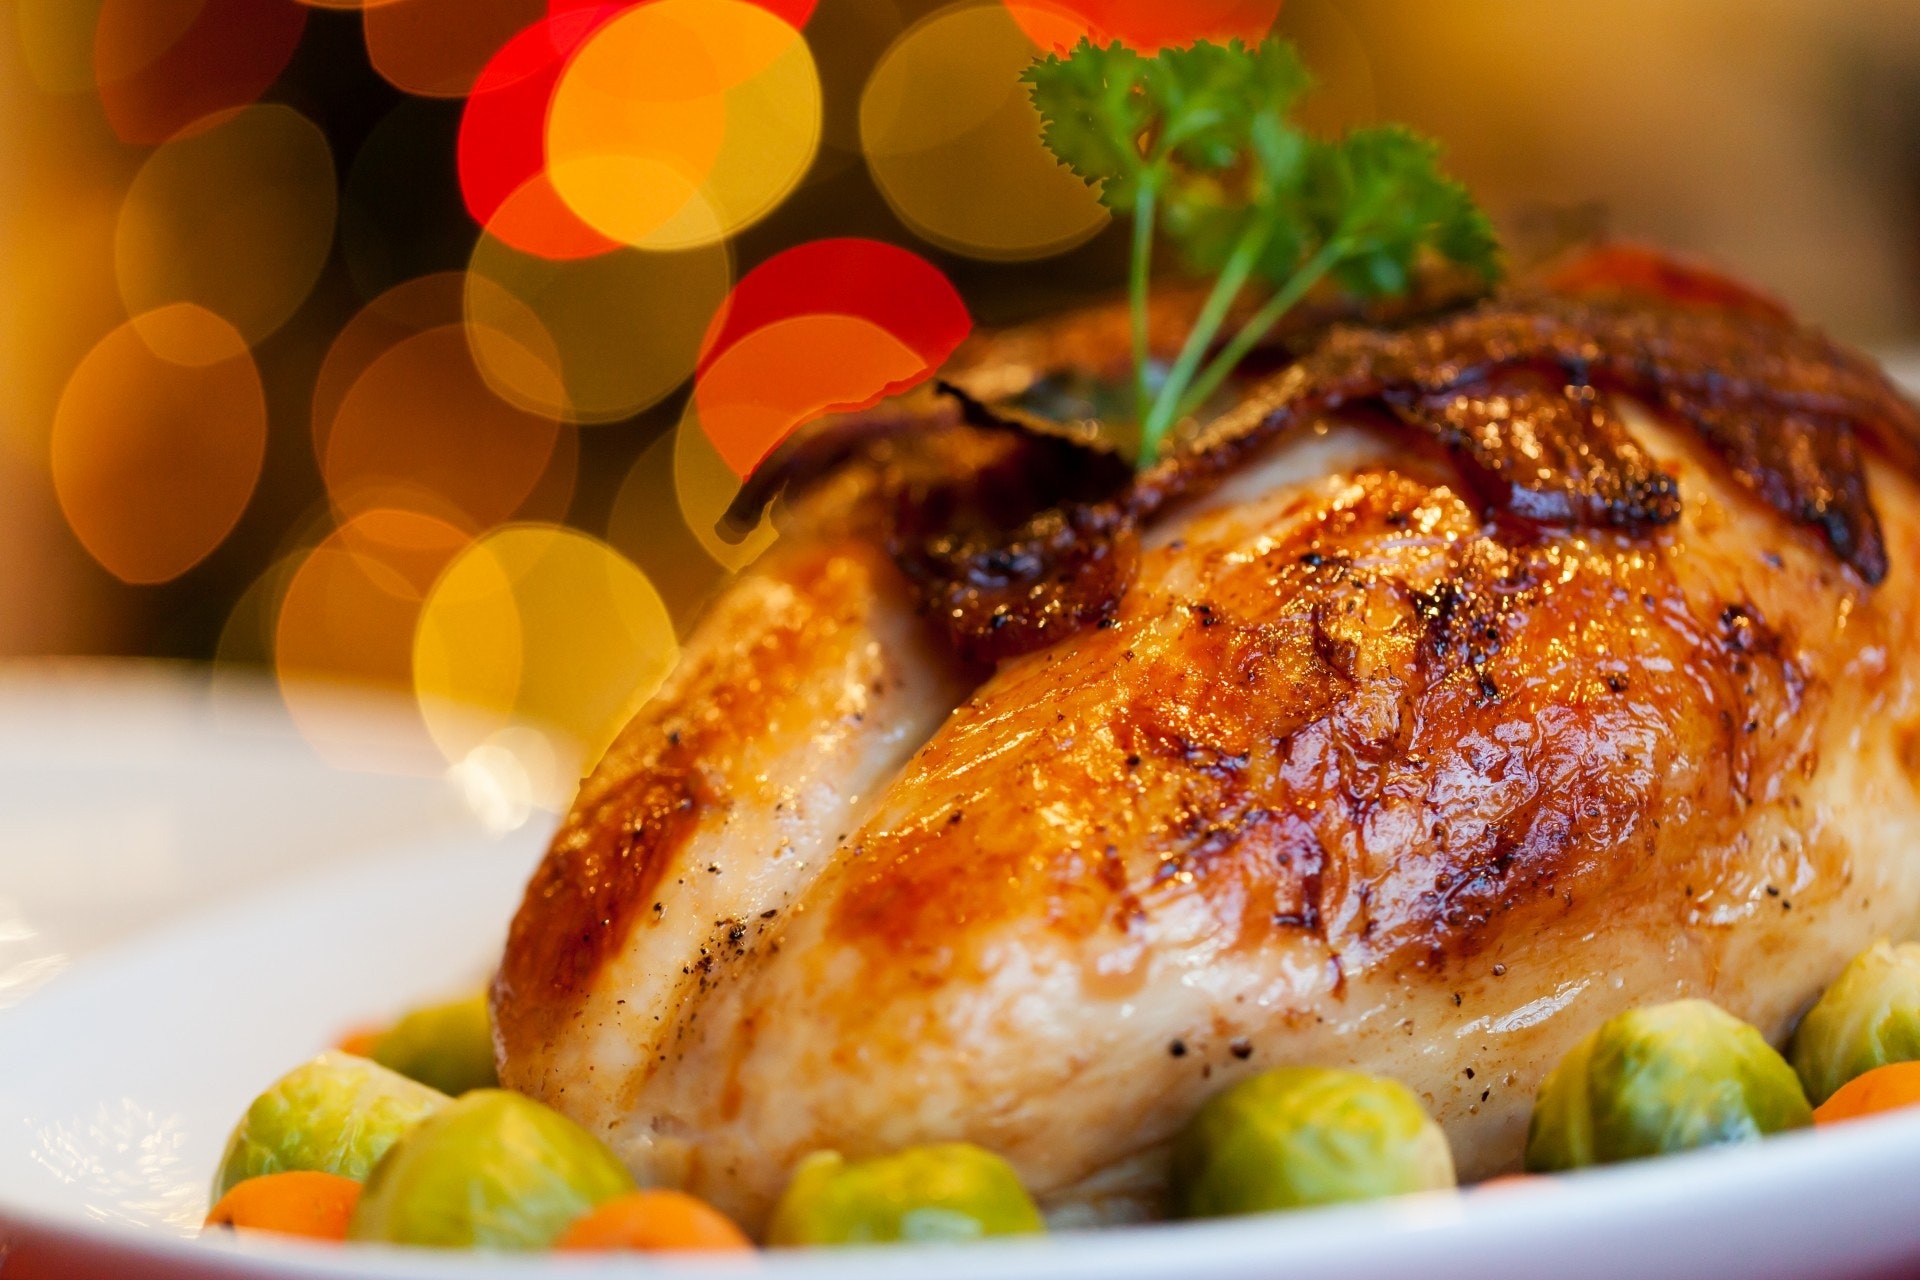 Top 10 Healthy Eating Tips for the Holidays